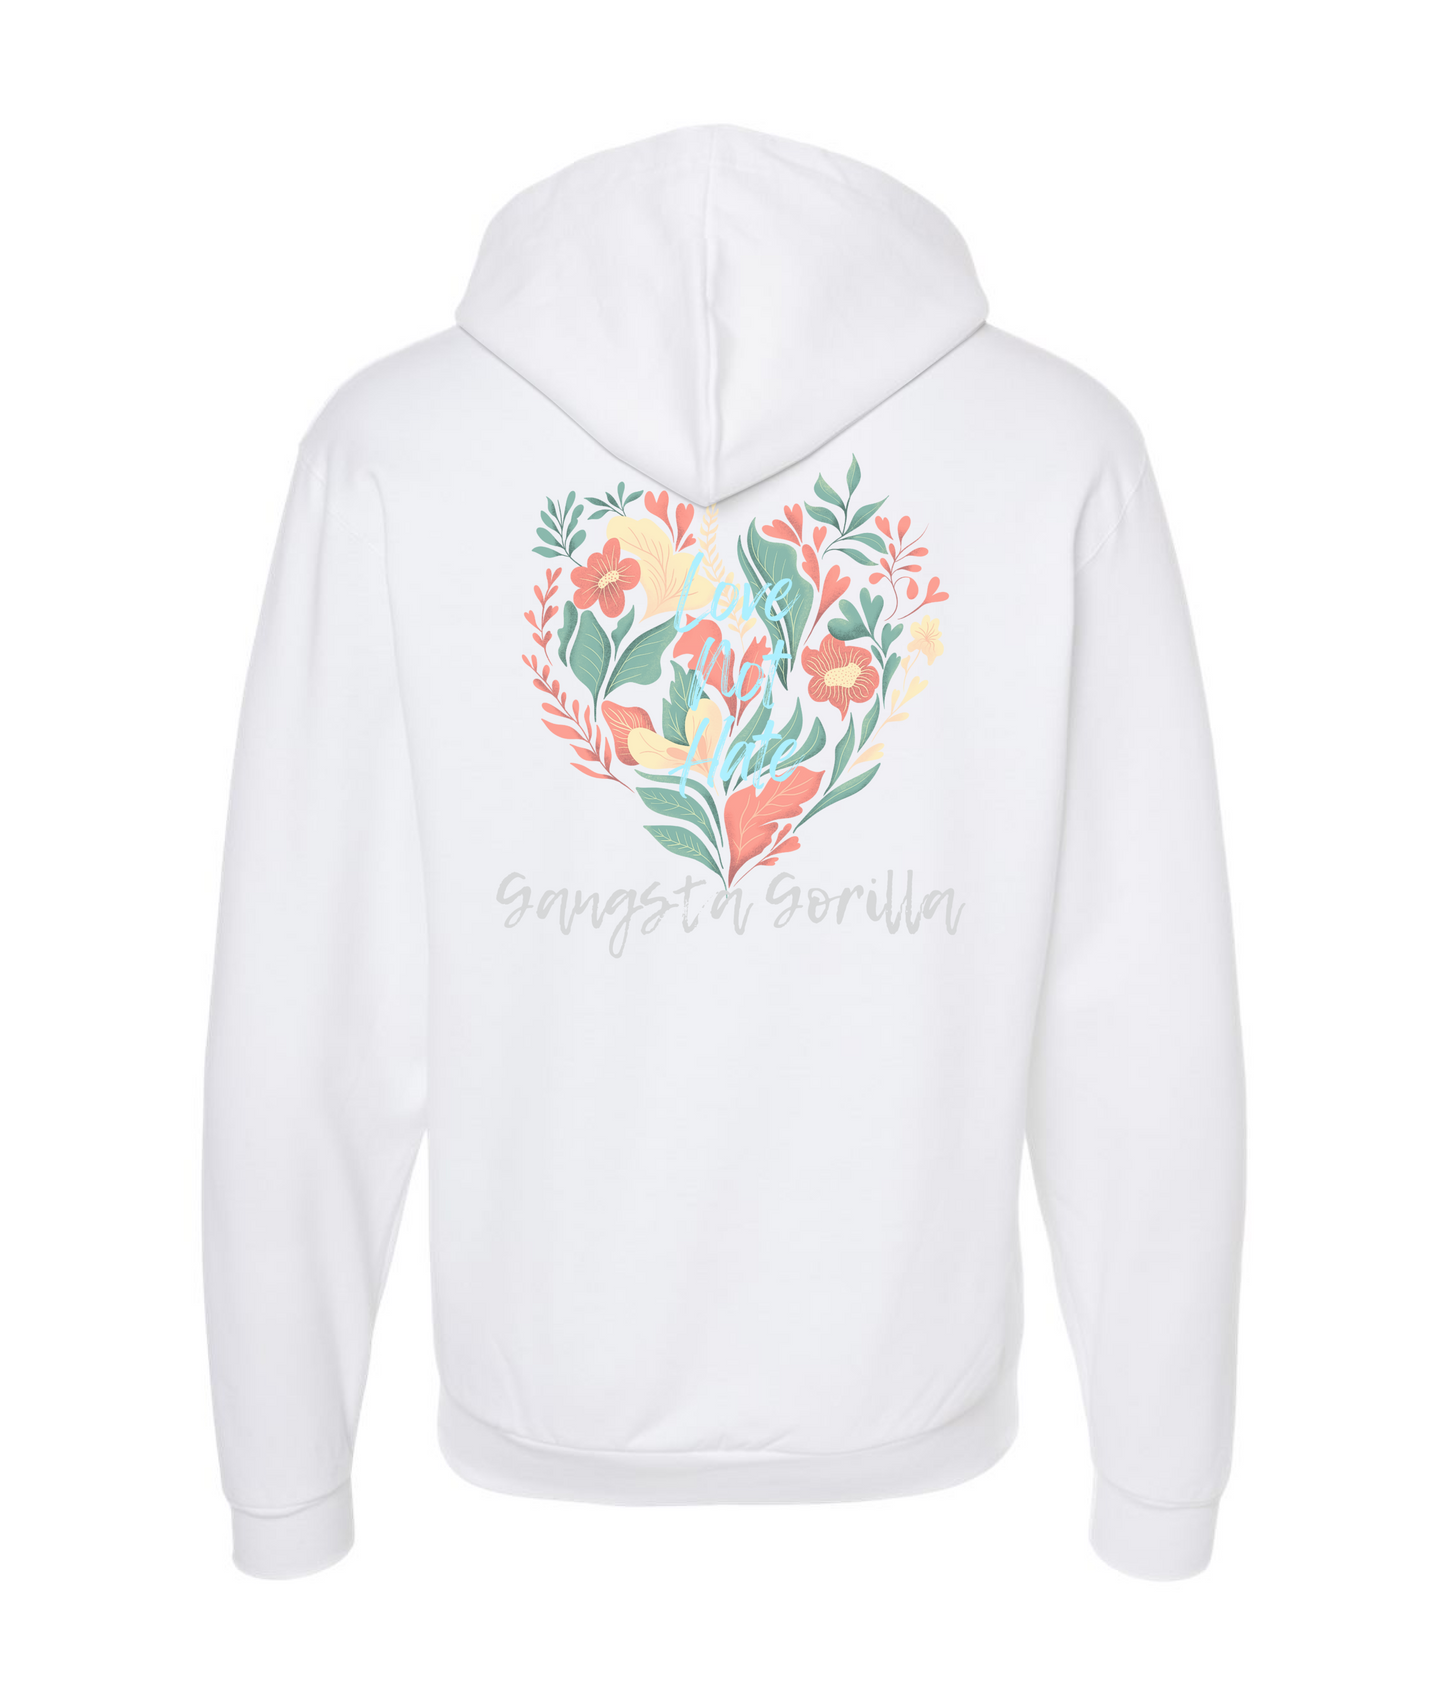 Gangsta Gorilla Extracts and Apparel - LOVE NOT HATE - White Zip Up Hoodie